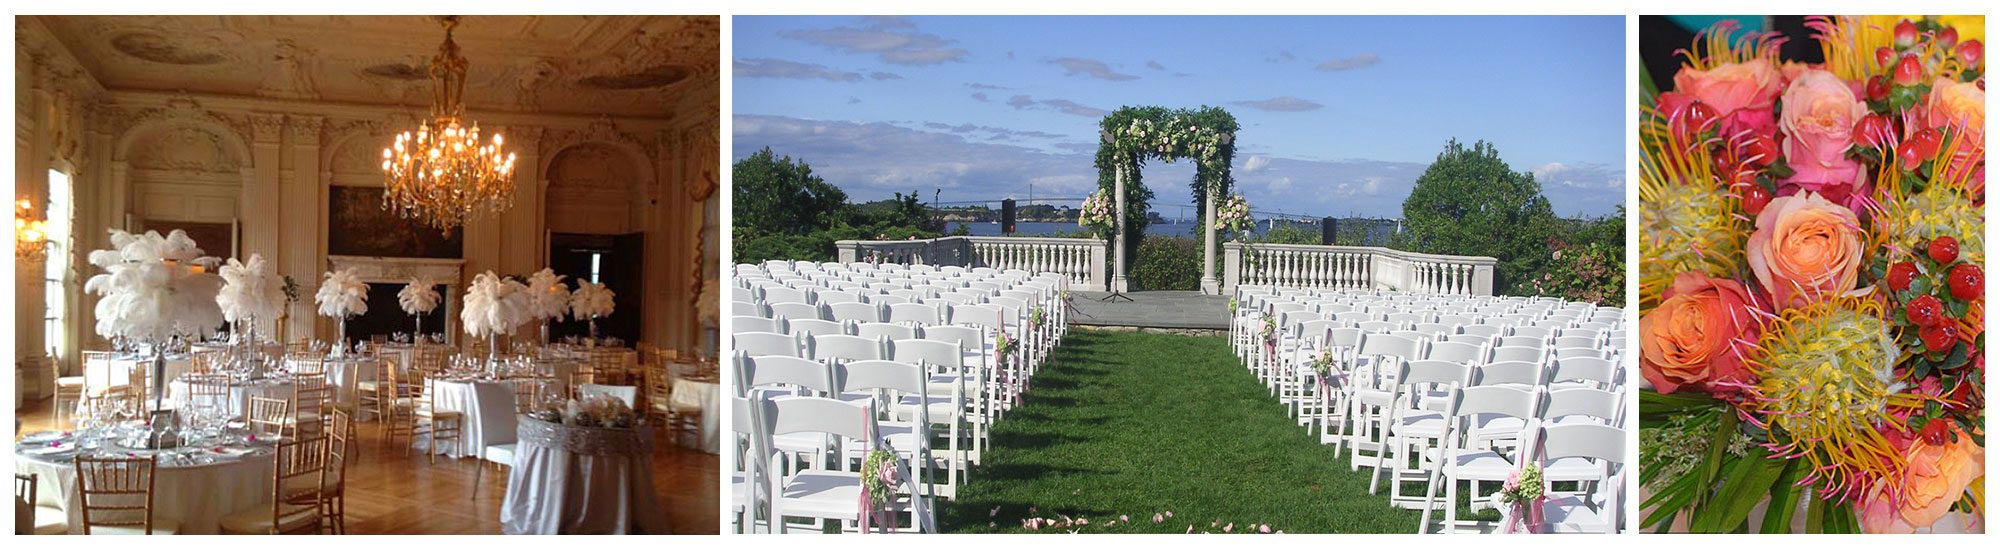 wedding salons and spas in newport